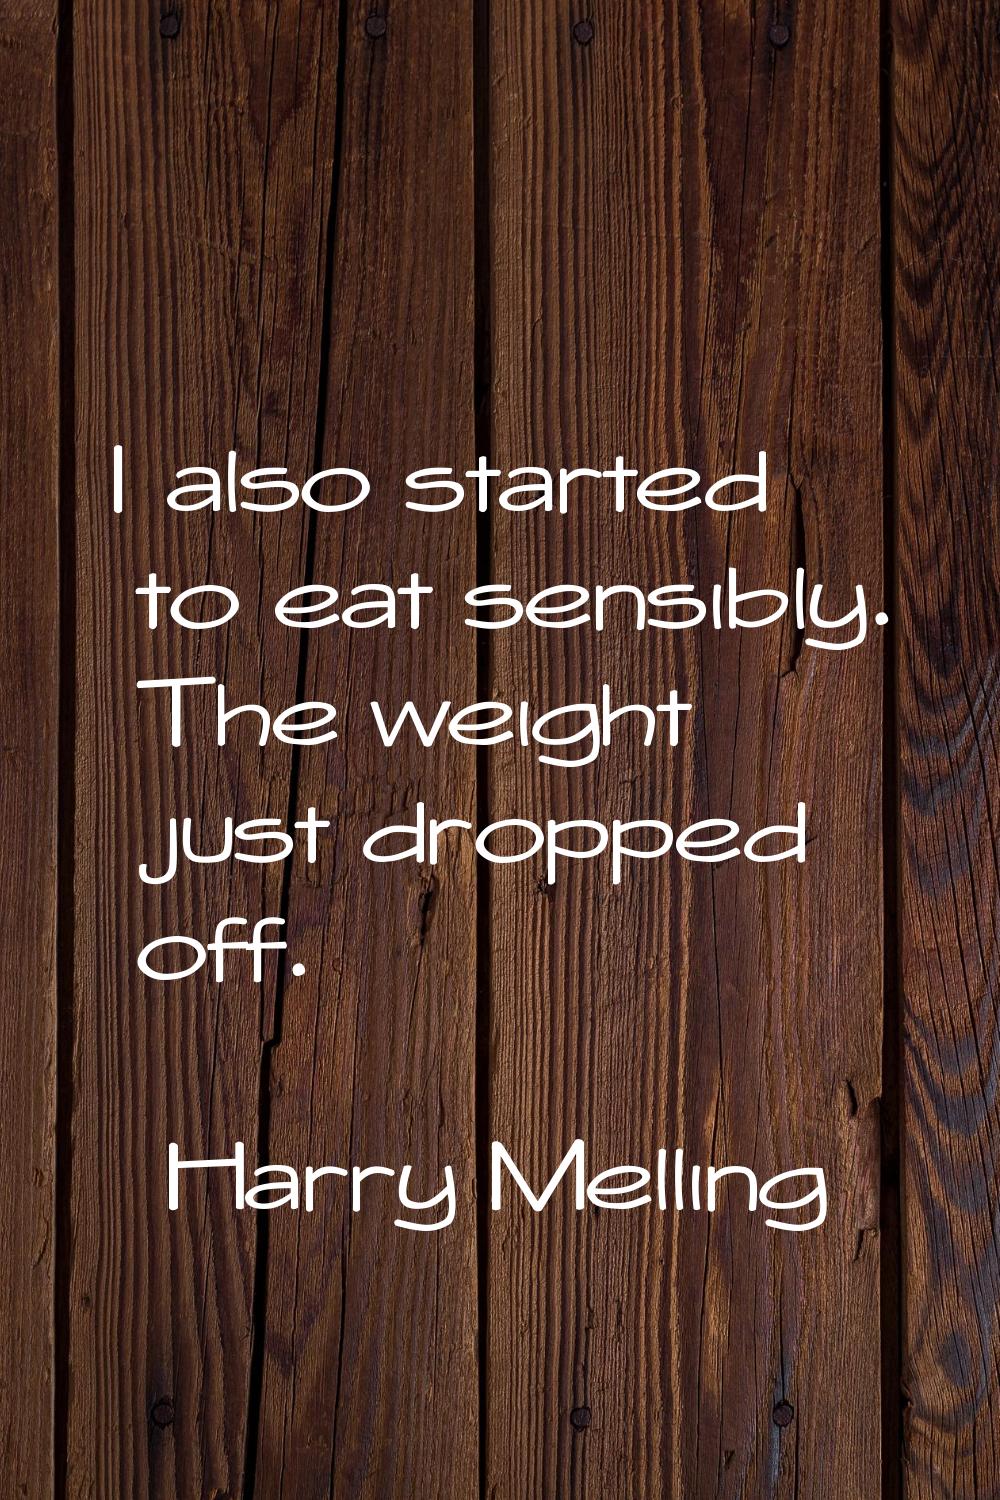 I also started to eat sensibly. The weight just dropped off.